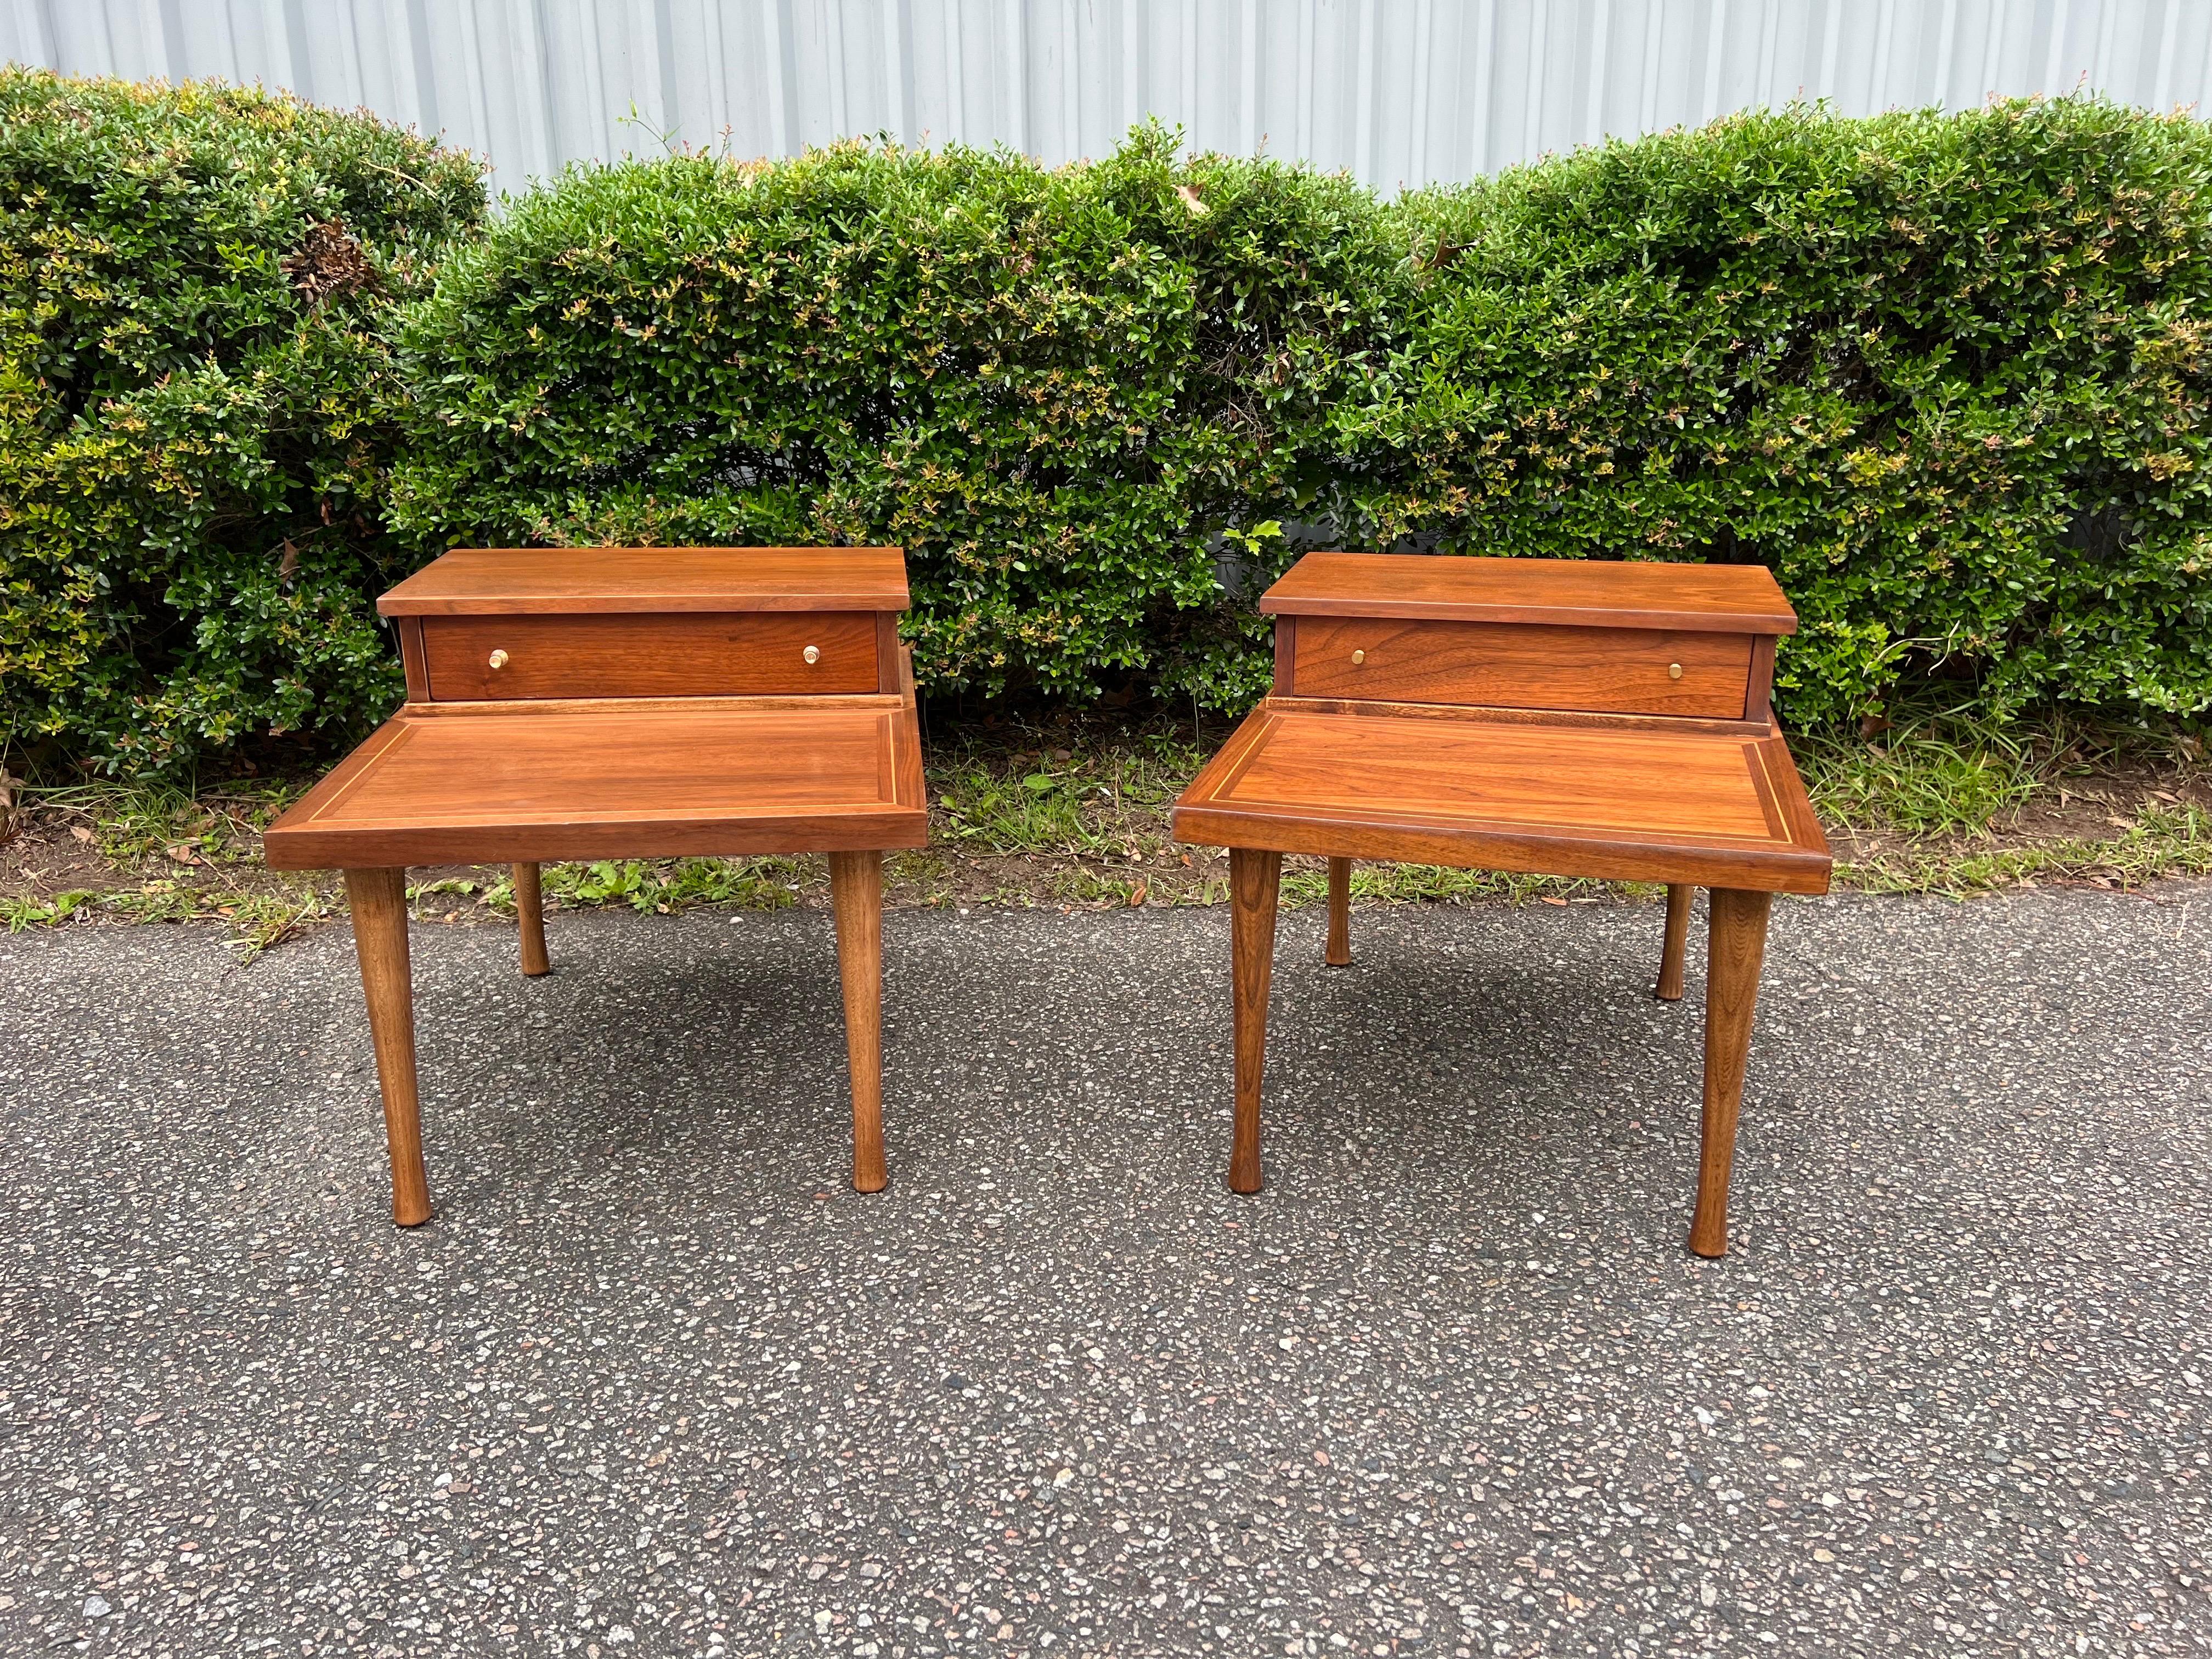 Mid 20th Century American of Martinsville midcentury Side Tables With Drawer
Newly refinished Mid-Century Modern side tables manufactured by American of Martinsville. Sleek brass pulls on the single drawer, a brass inlaid band around the lower